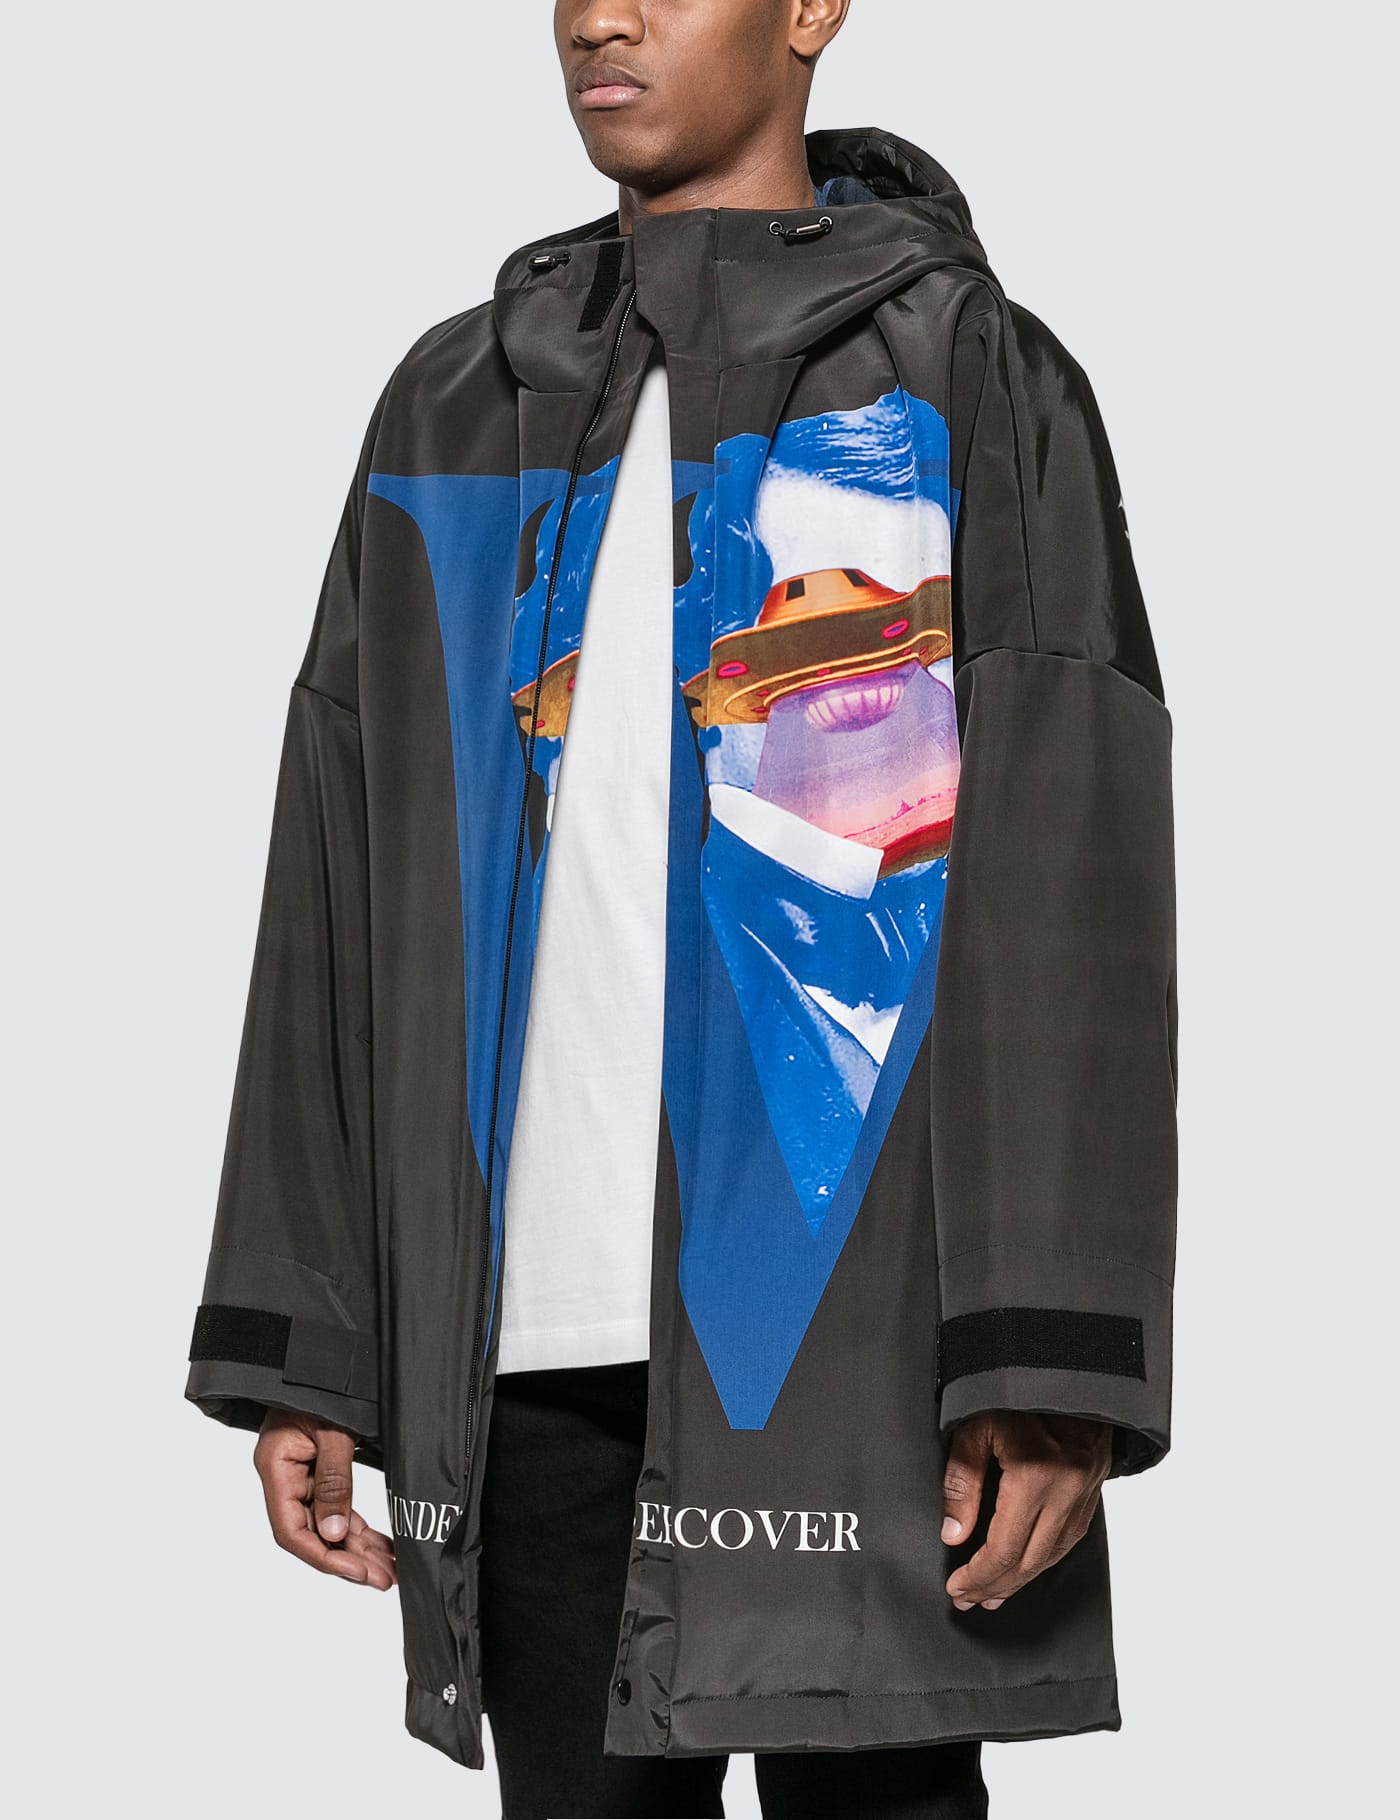 Undercover - Undercover x Valentino Coat | HBX - Globally Curated